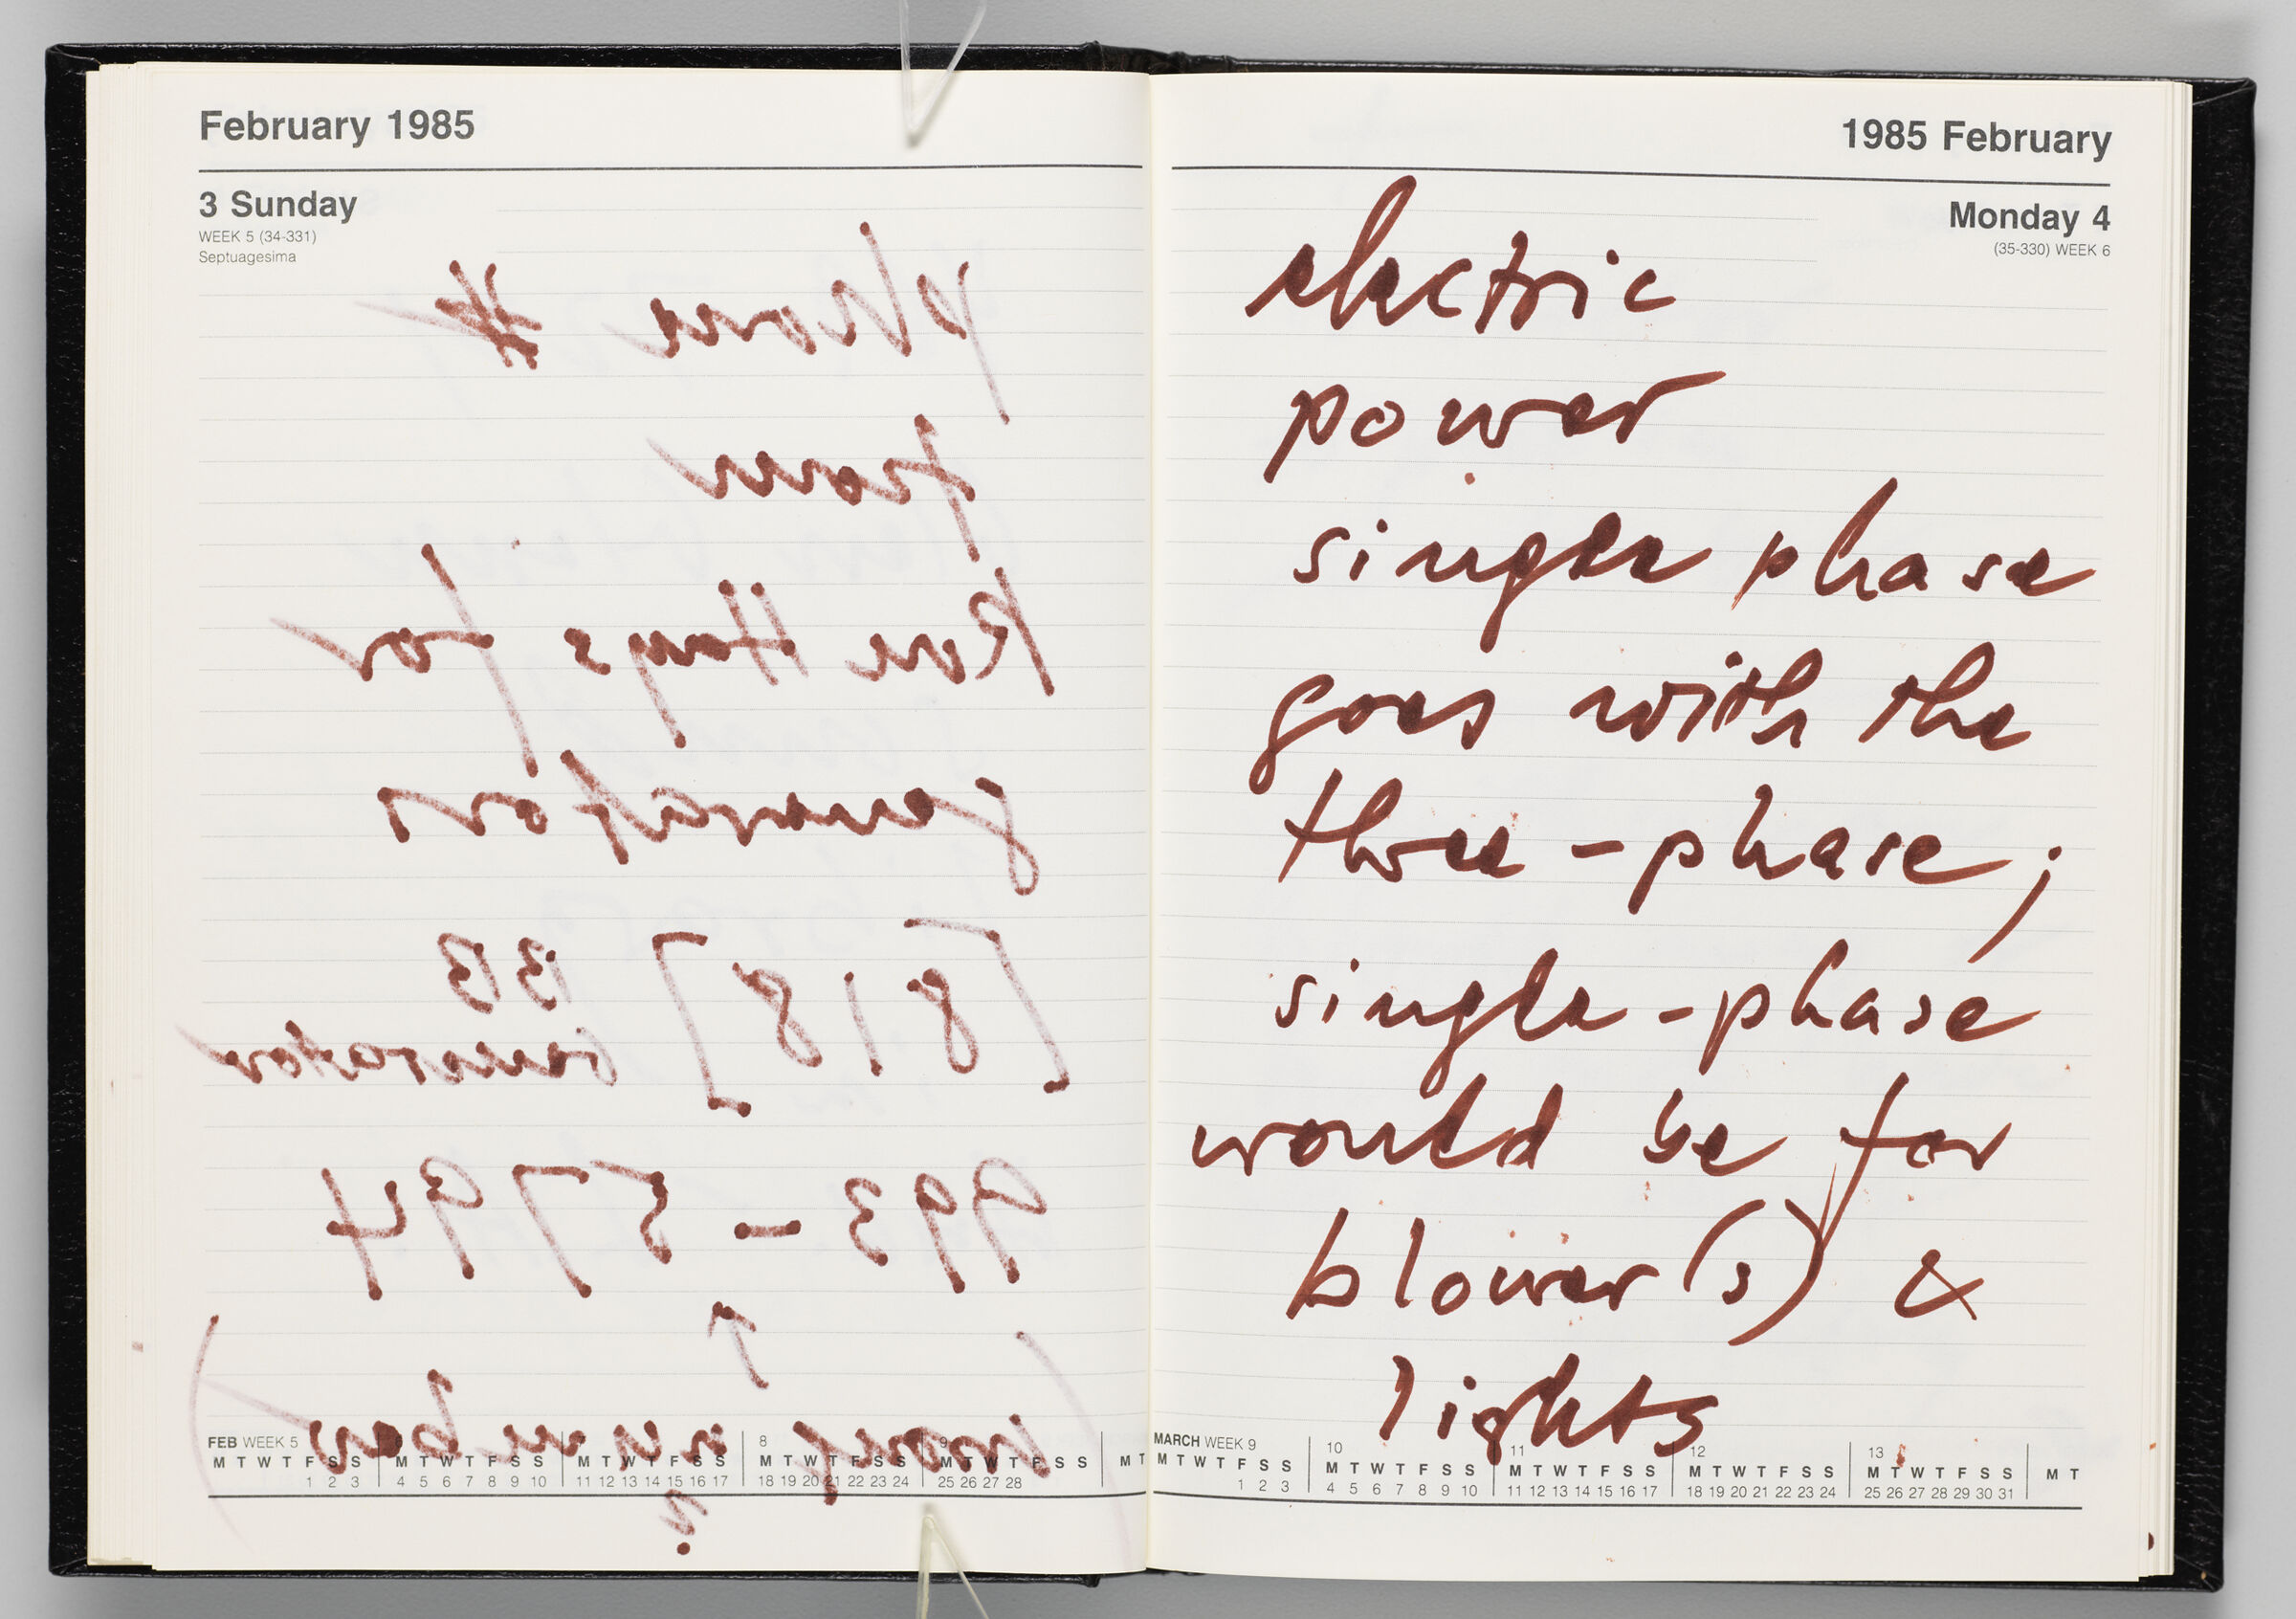 Untitled (Bleed-Through Of Previous Page, Left Page); Untitled (Notes On Calendar Page February 4, 1985, Right Page)